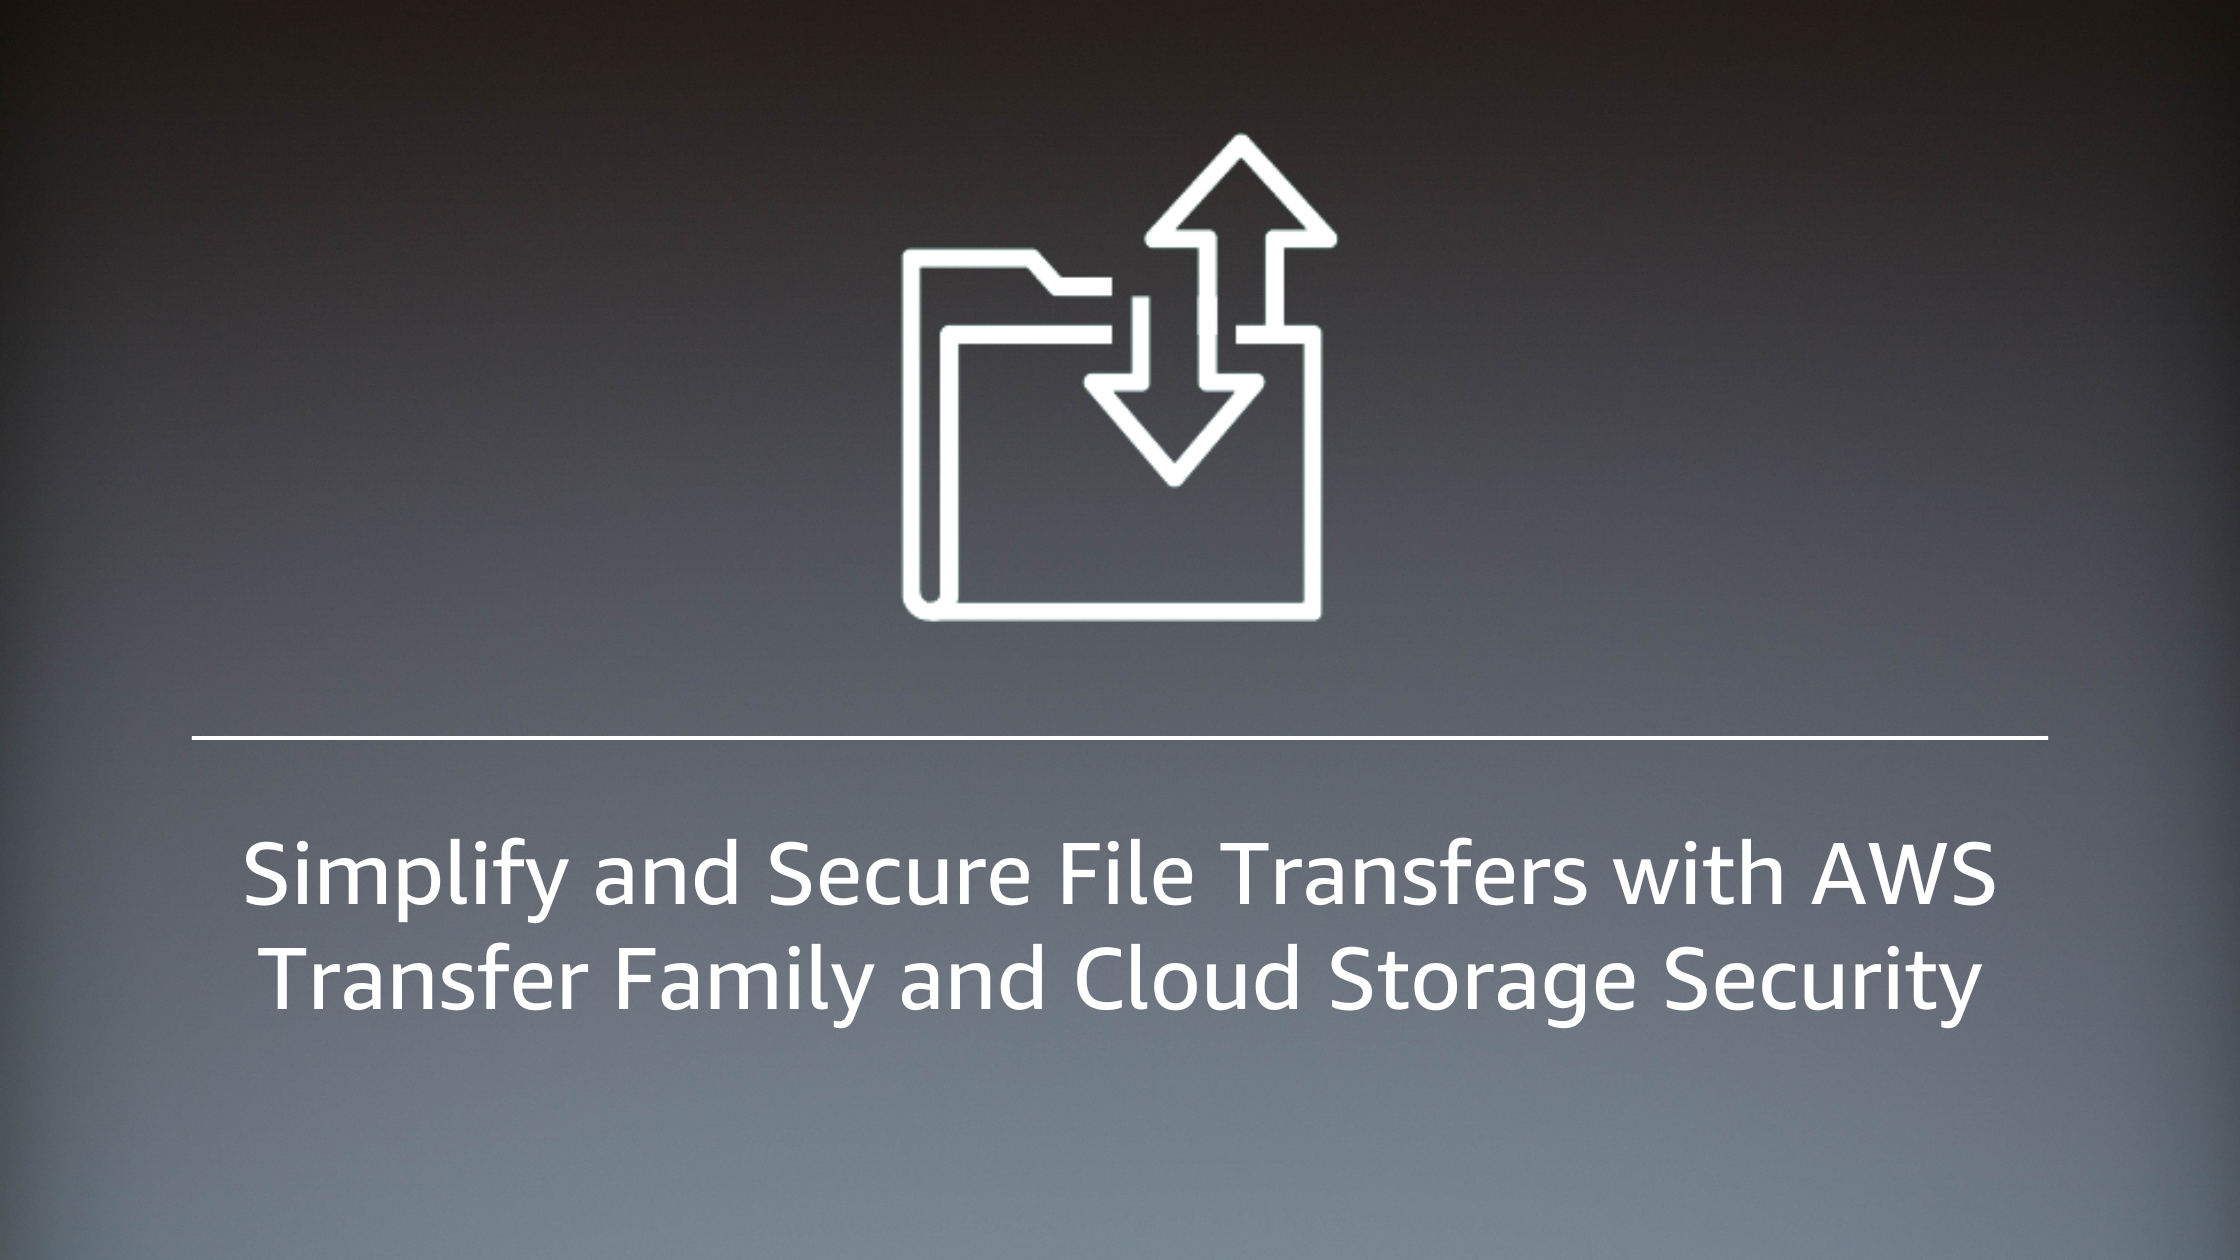 Simplify and Secure File Transfers with AWS Transfer Family and Cloud Storage Security